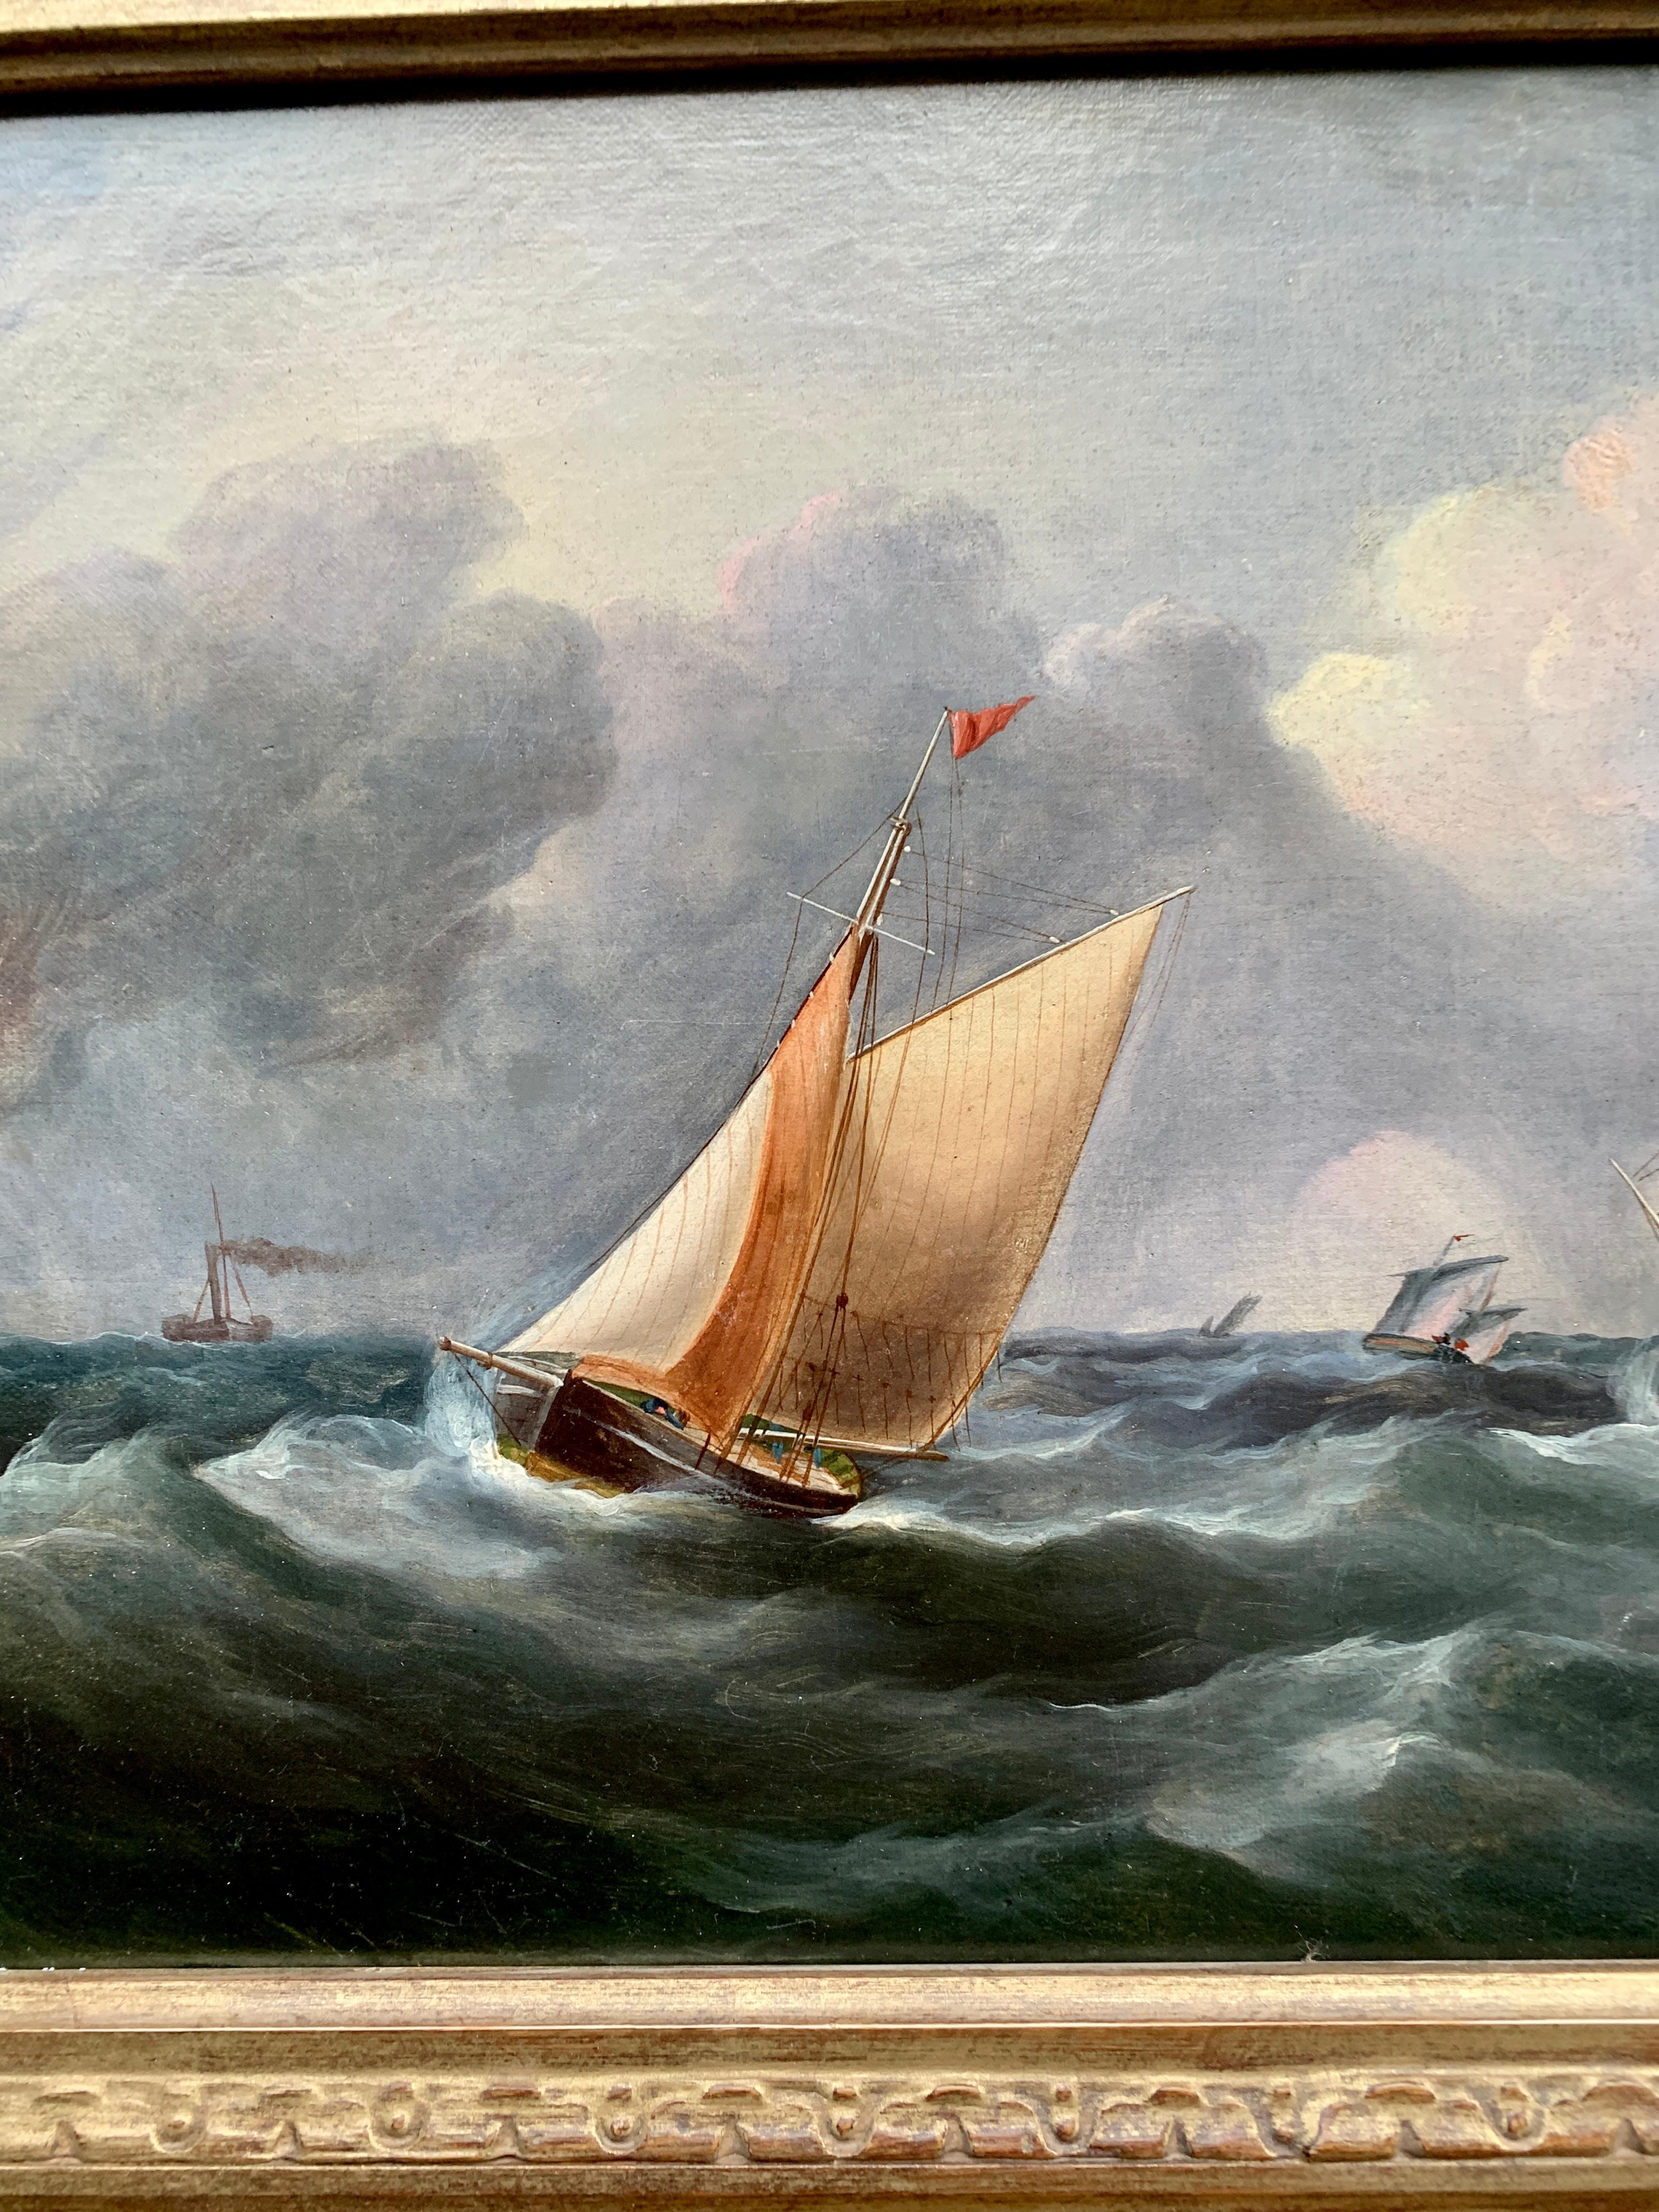 Antique 19th century English Yacht and Warship at sea off the English coast - Painting by R.B.Spencer